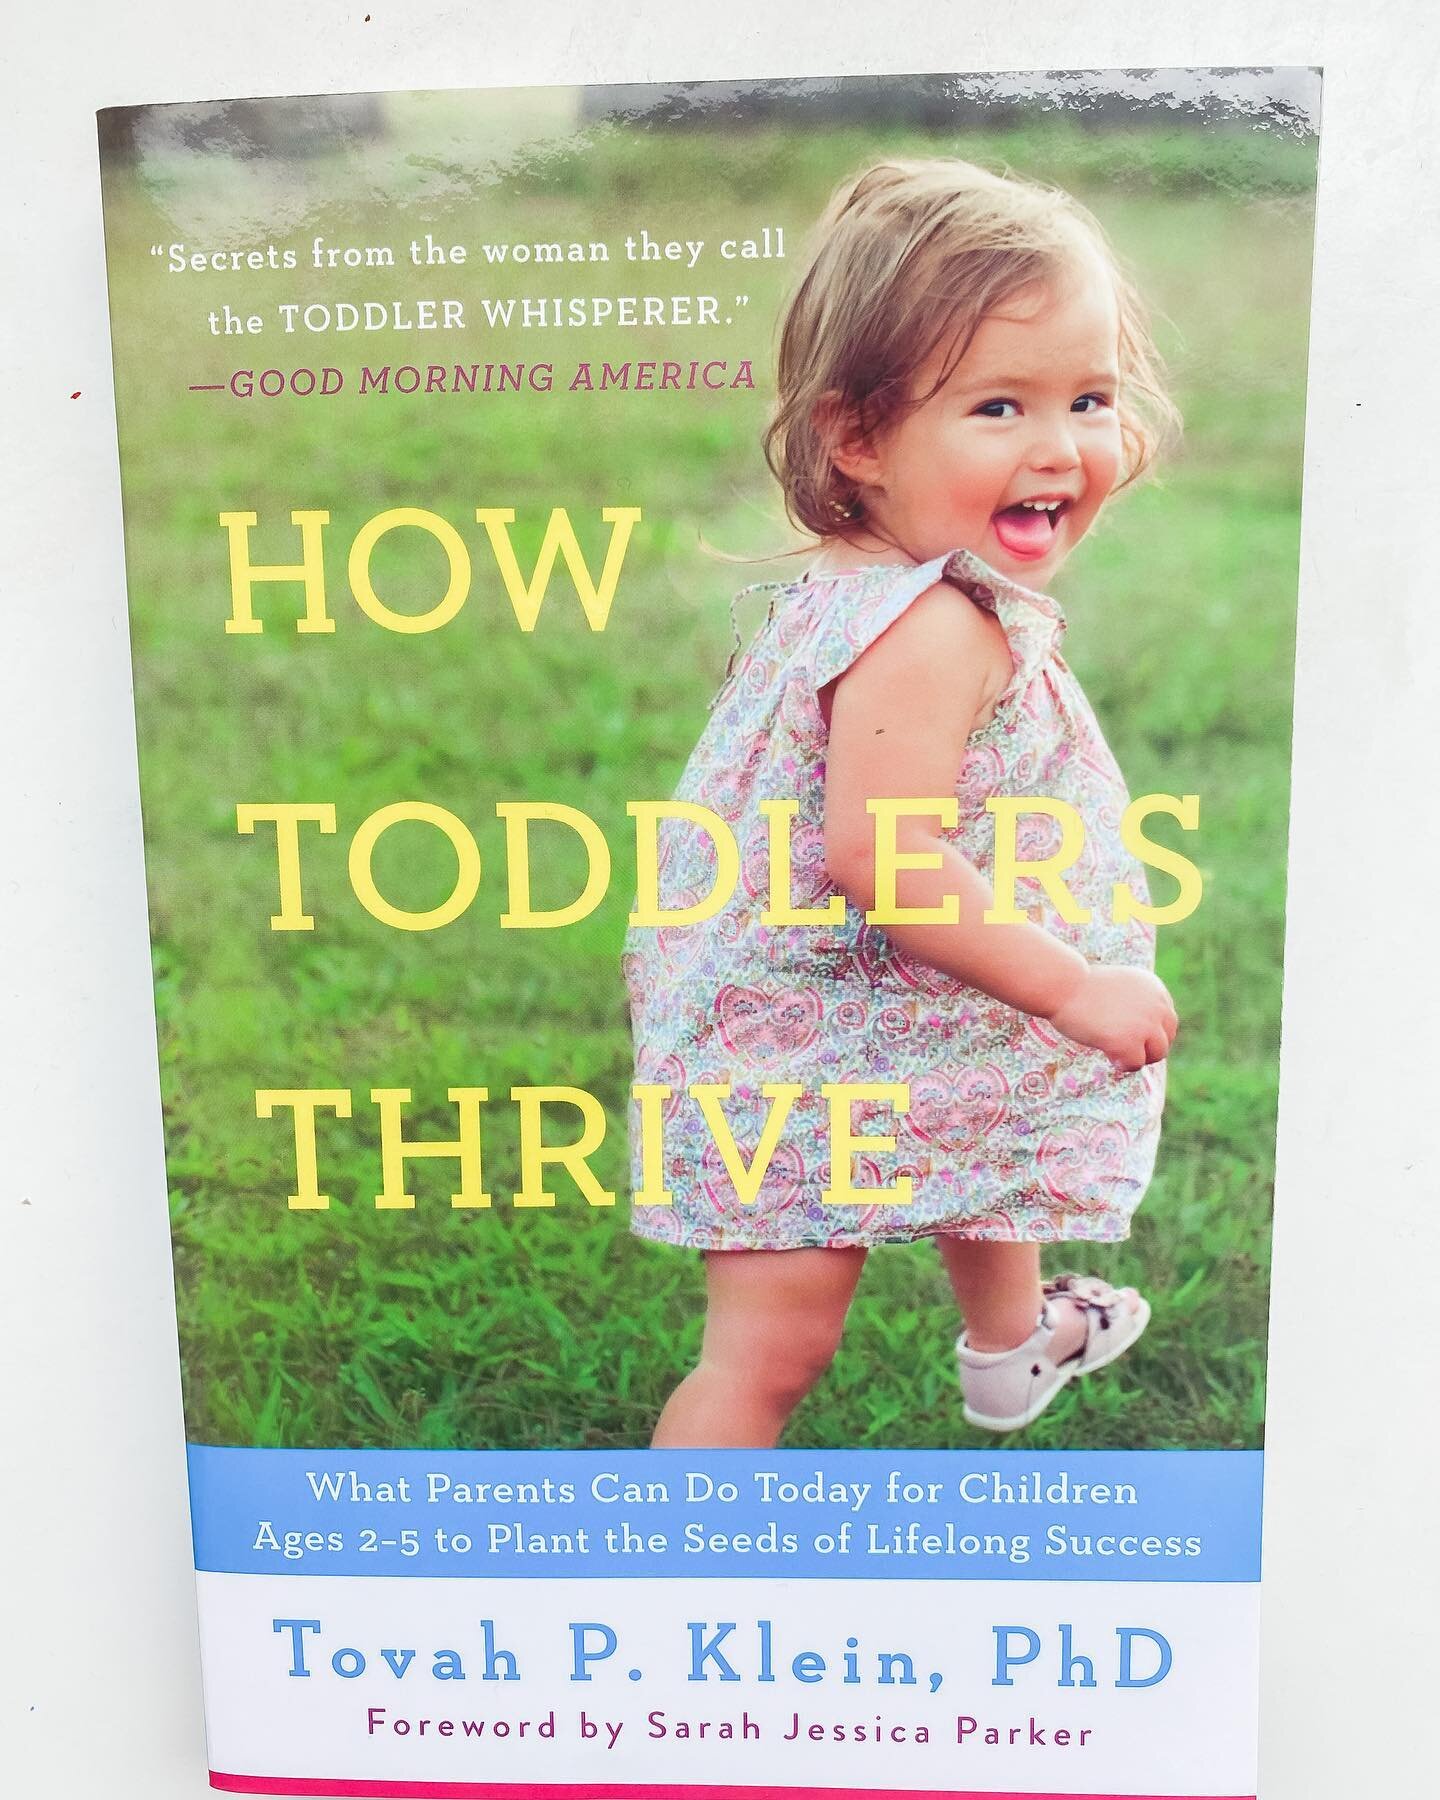 T O D D L E R S 

Toddler years are so full of wonder and curiosity but are also filled with a time that can be very challenging and emotional for them, and for us parents &amp; educators. 

This book specifically highlights how ages 2-5 are the best